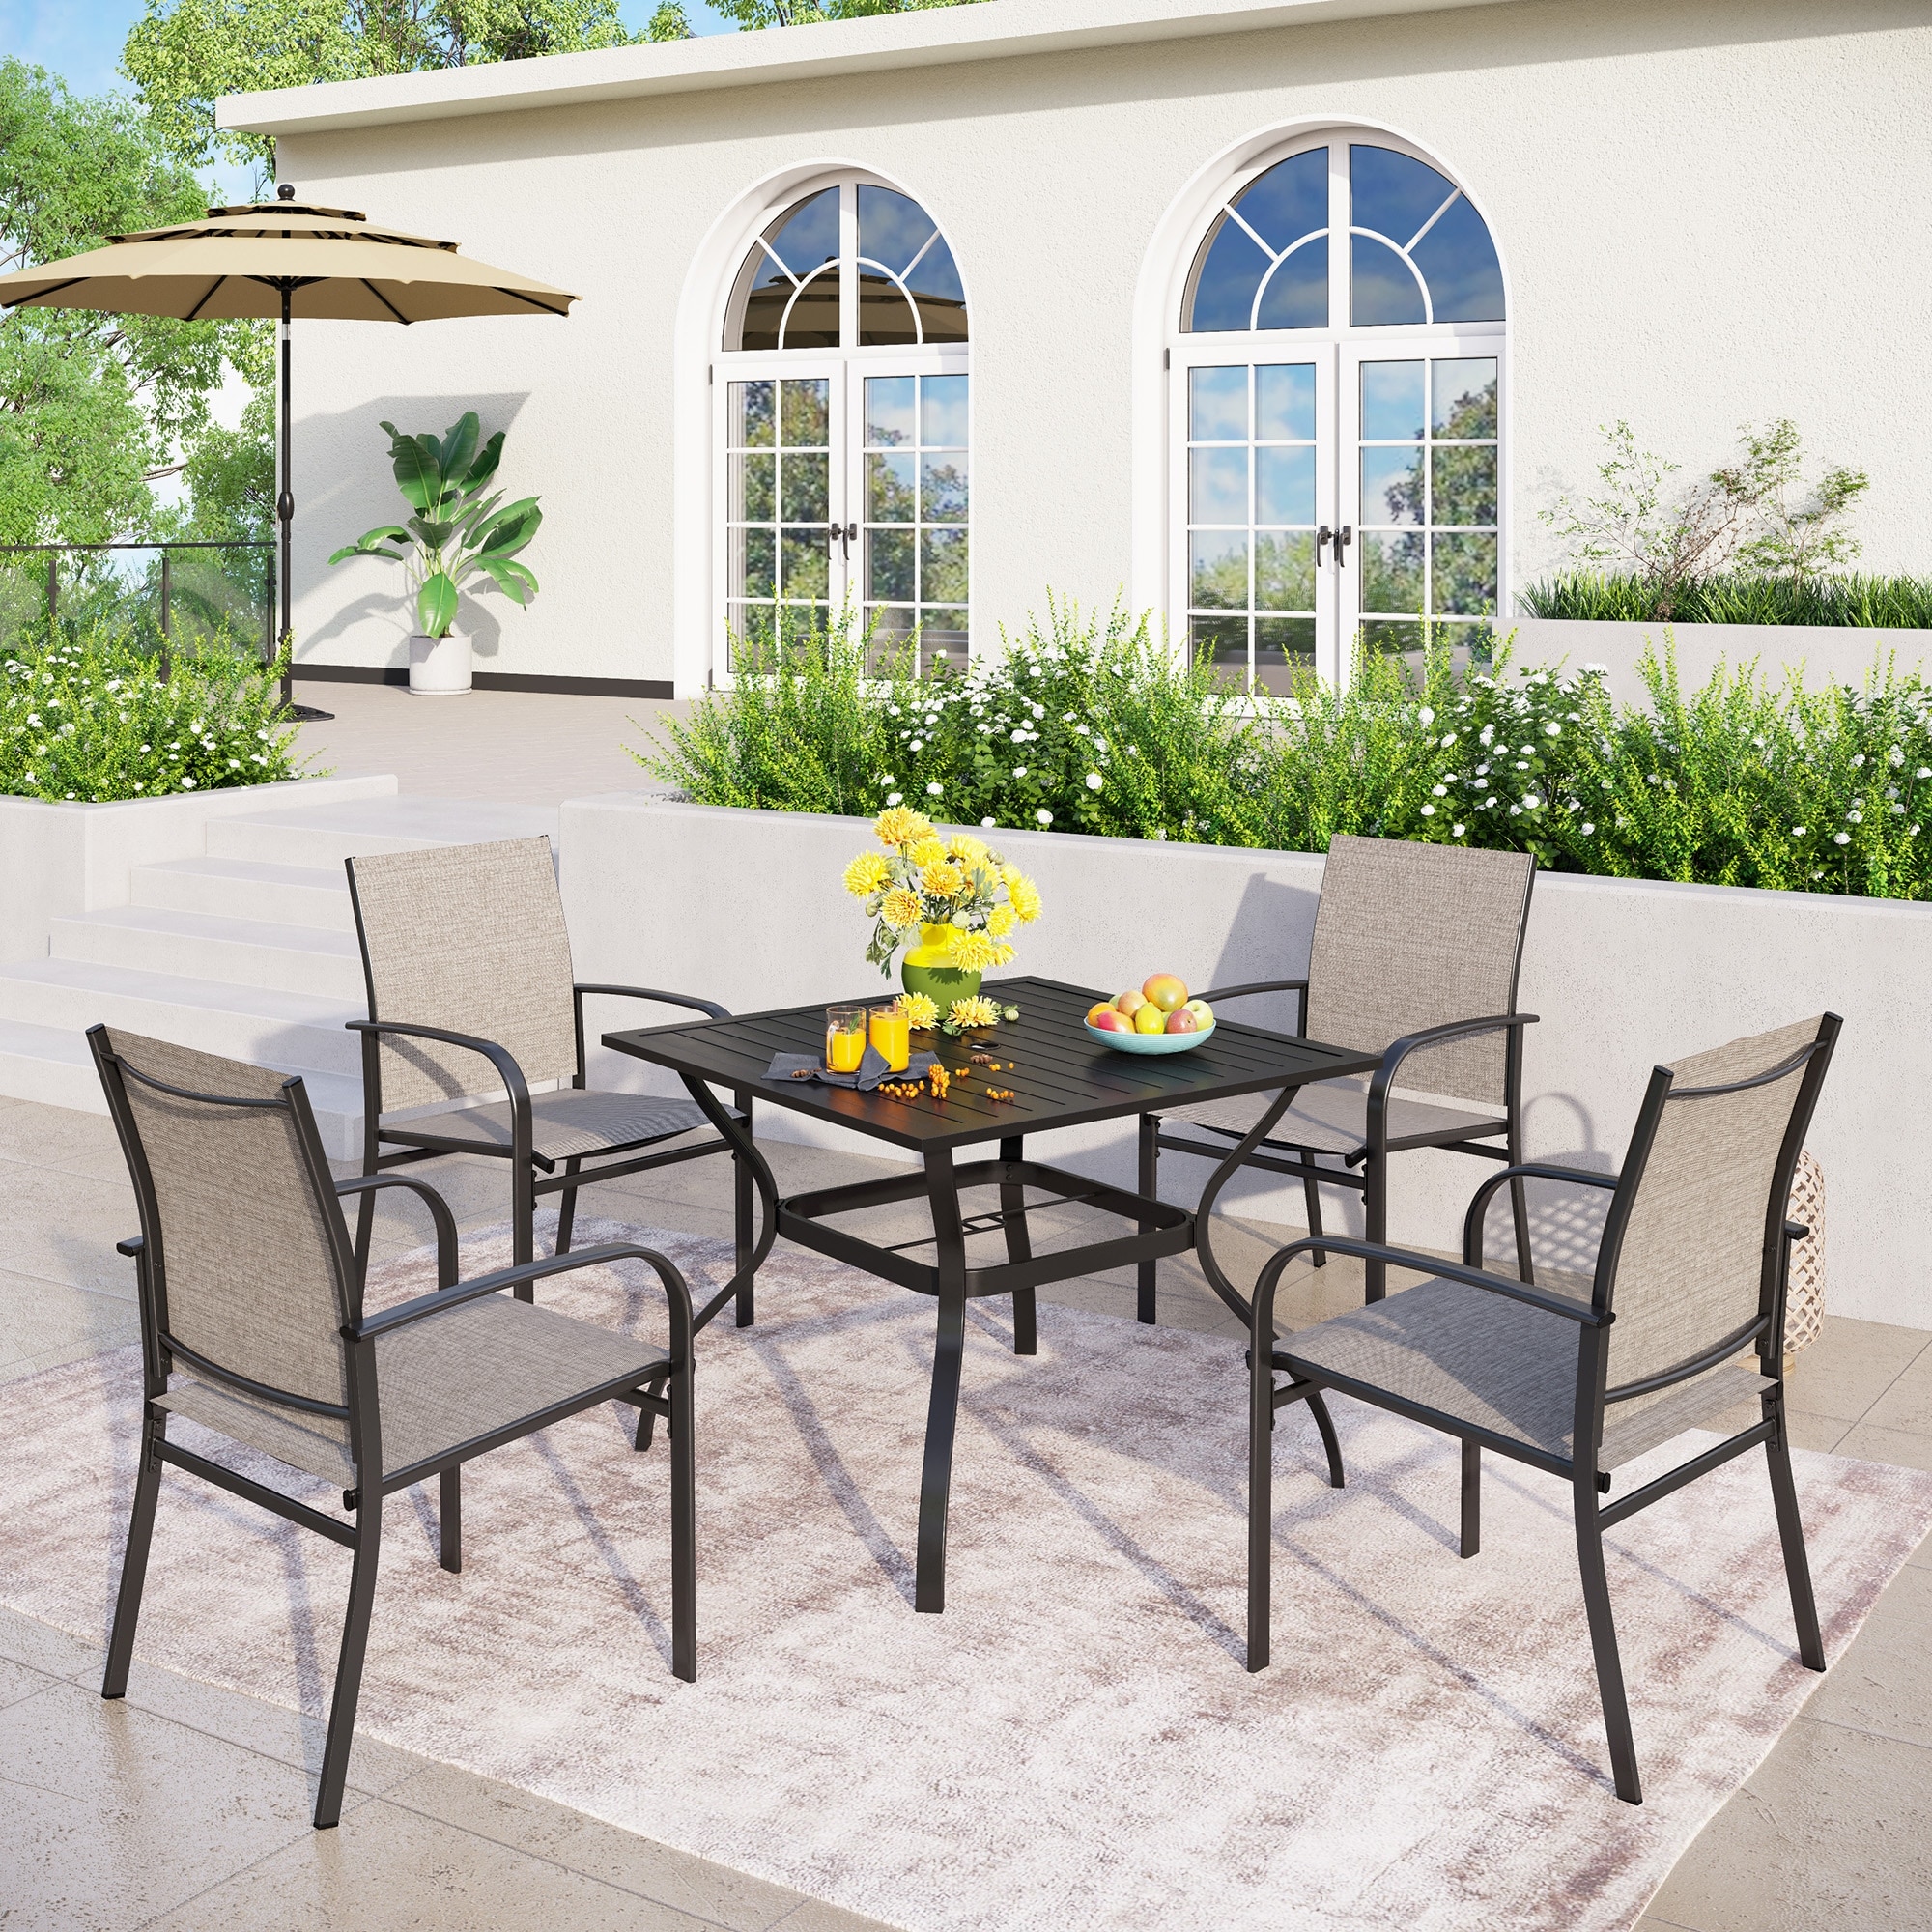 5-piece Patio Dining Set  37 Inch Square Metal Table And 4 Textilene Dining Chairs